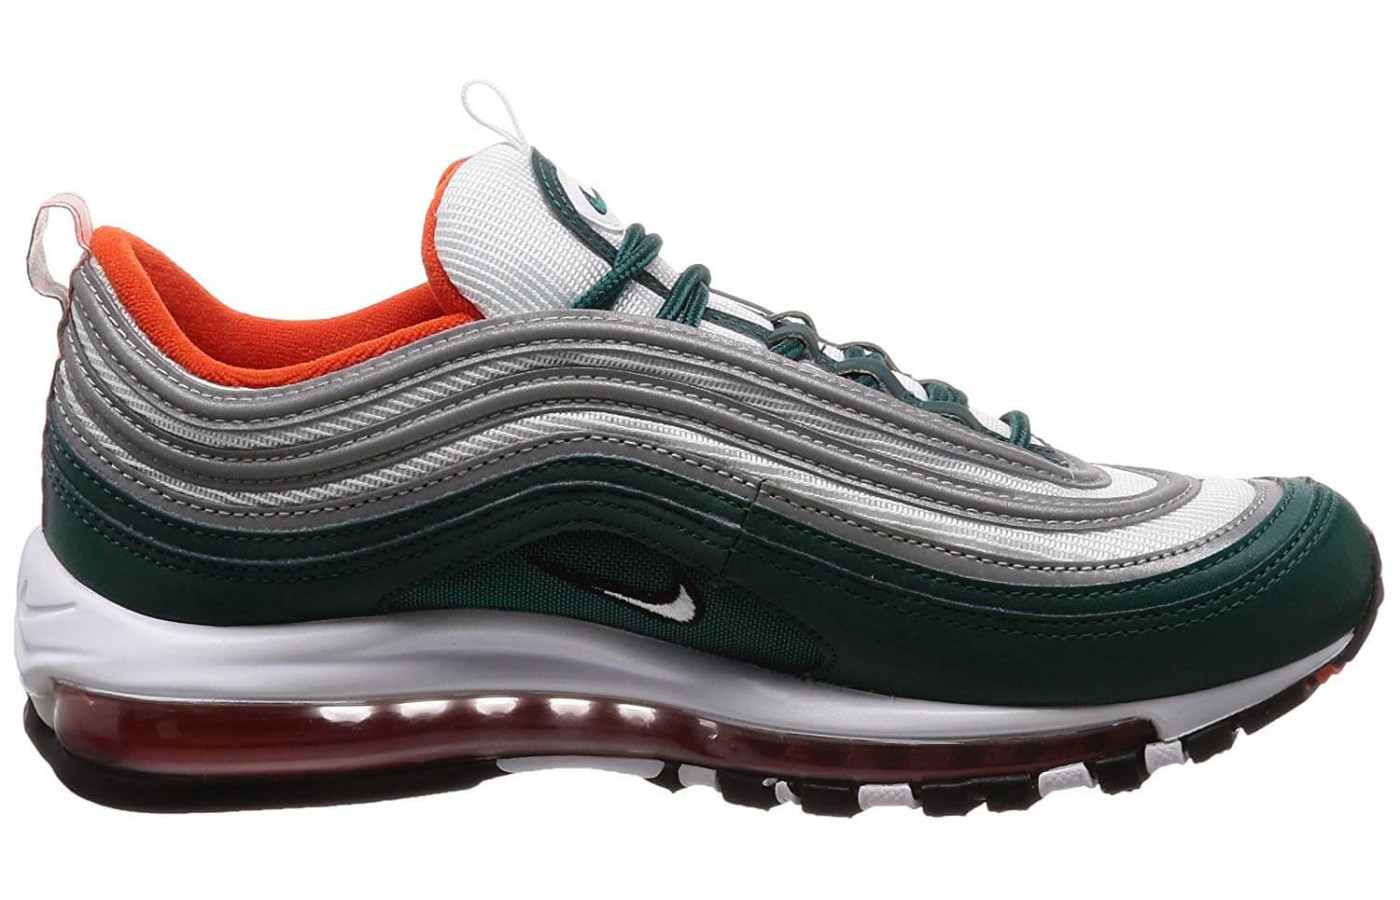 The Air Max 97 features Air Max cushioning throughout the length of the foot